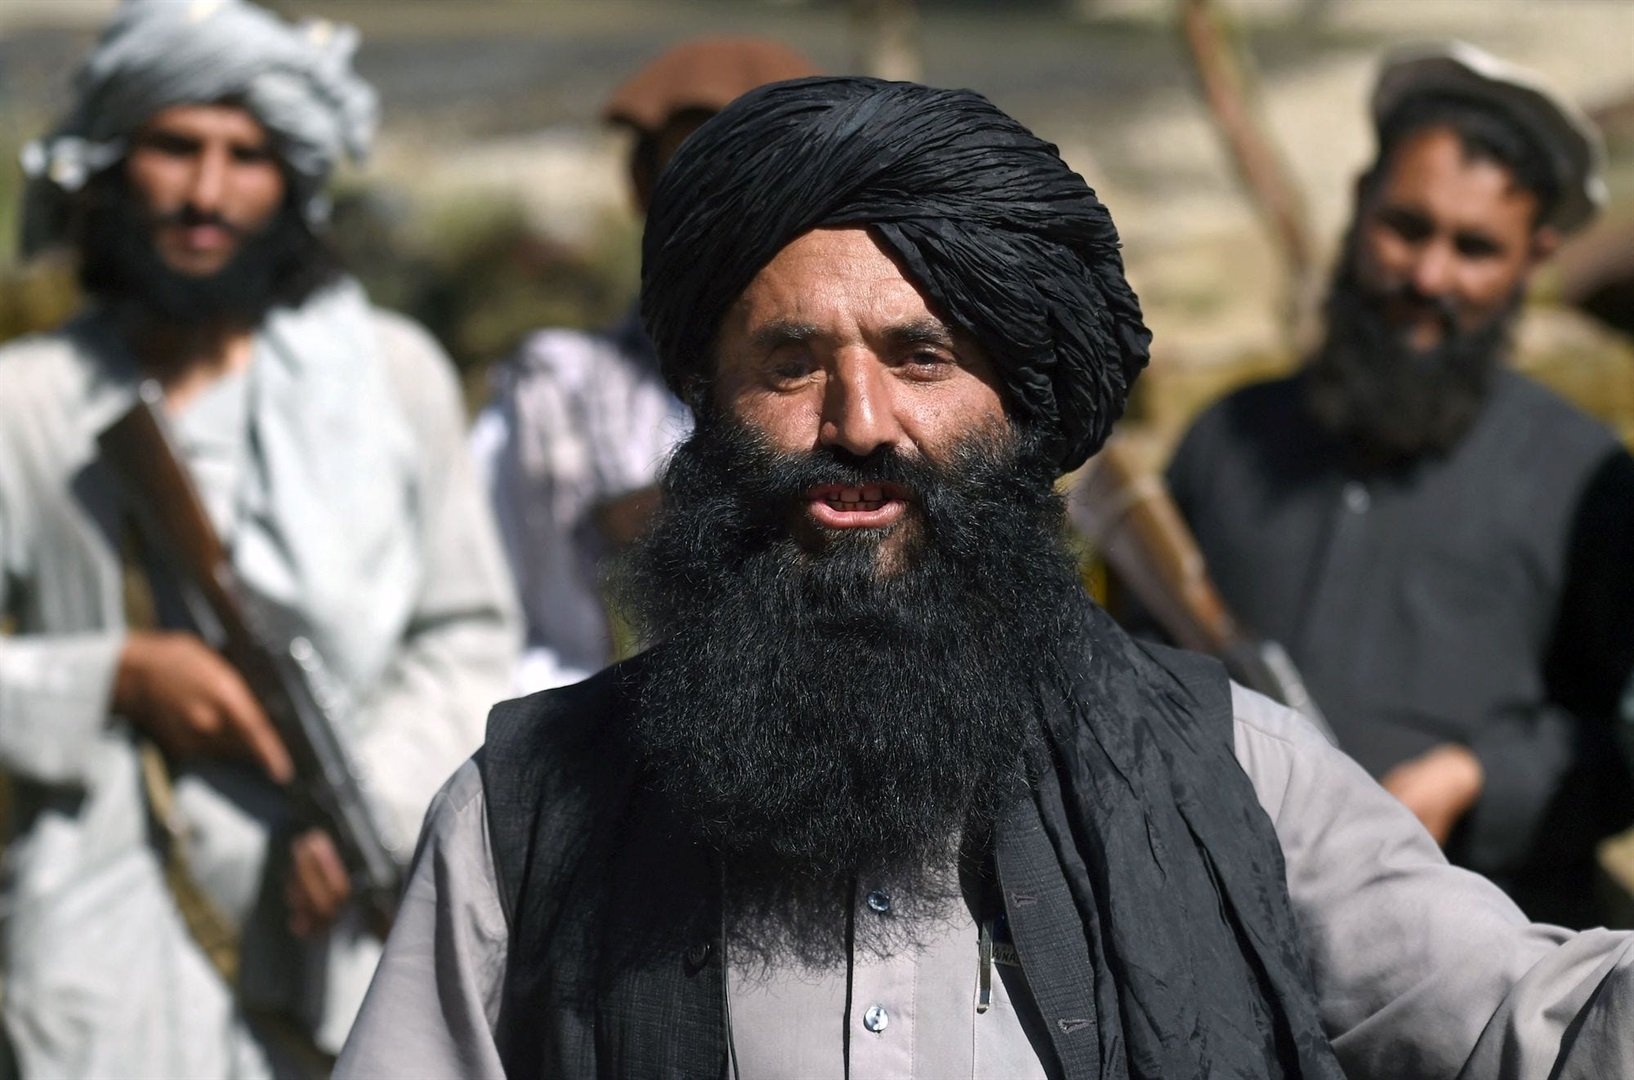 taliban-release-media-guidelines-ban-shows-with-female-actors-news24